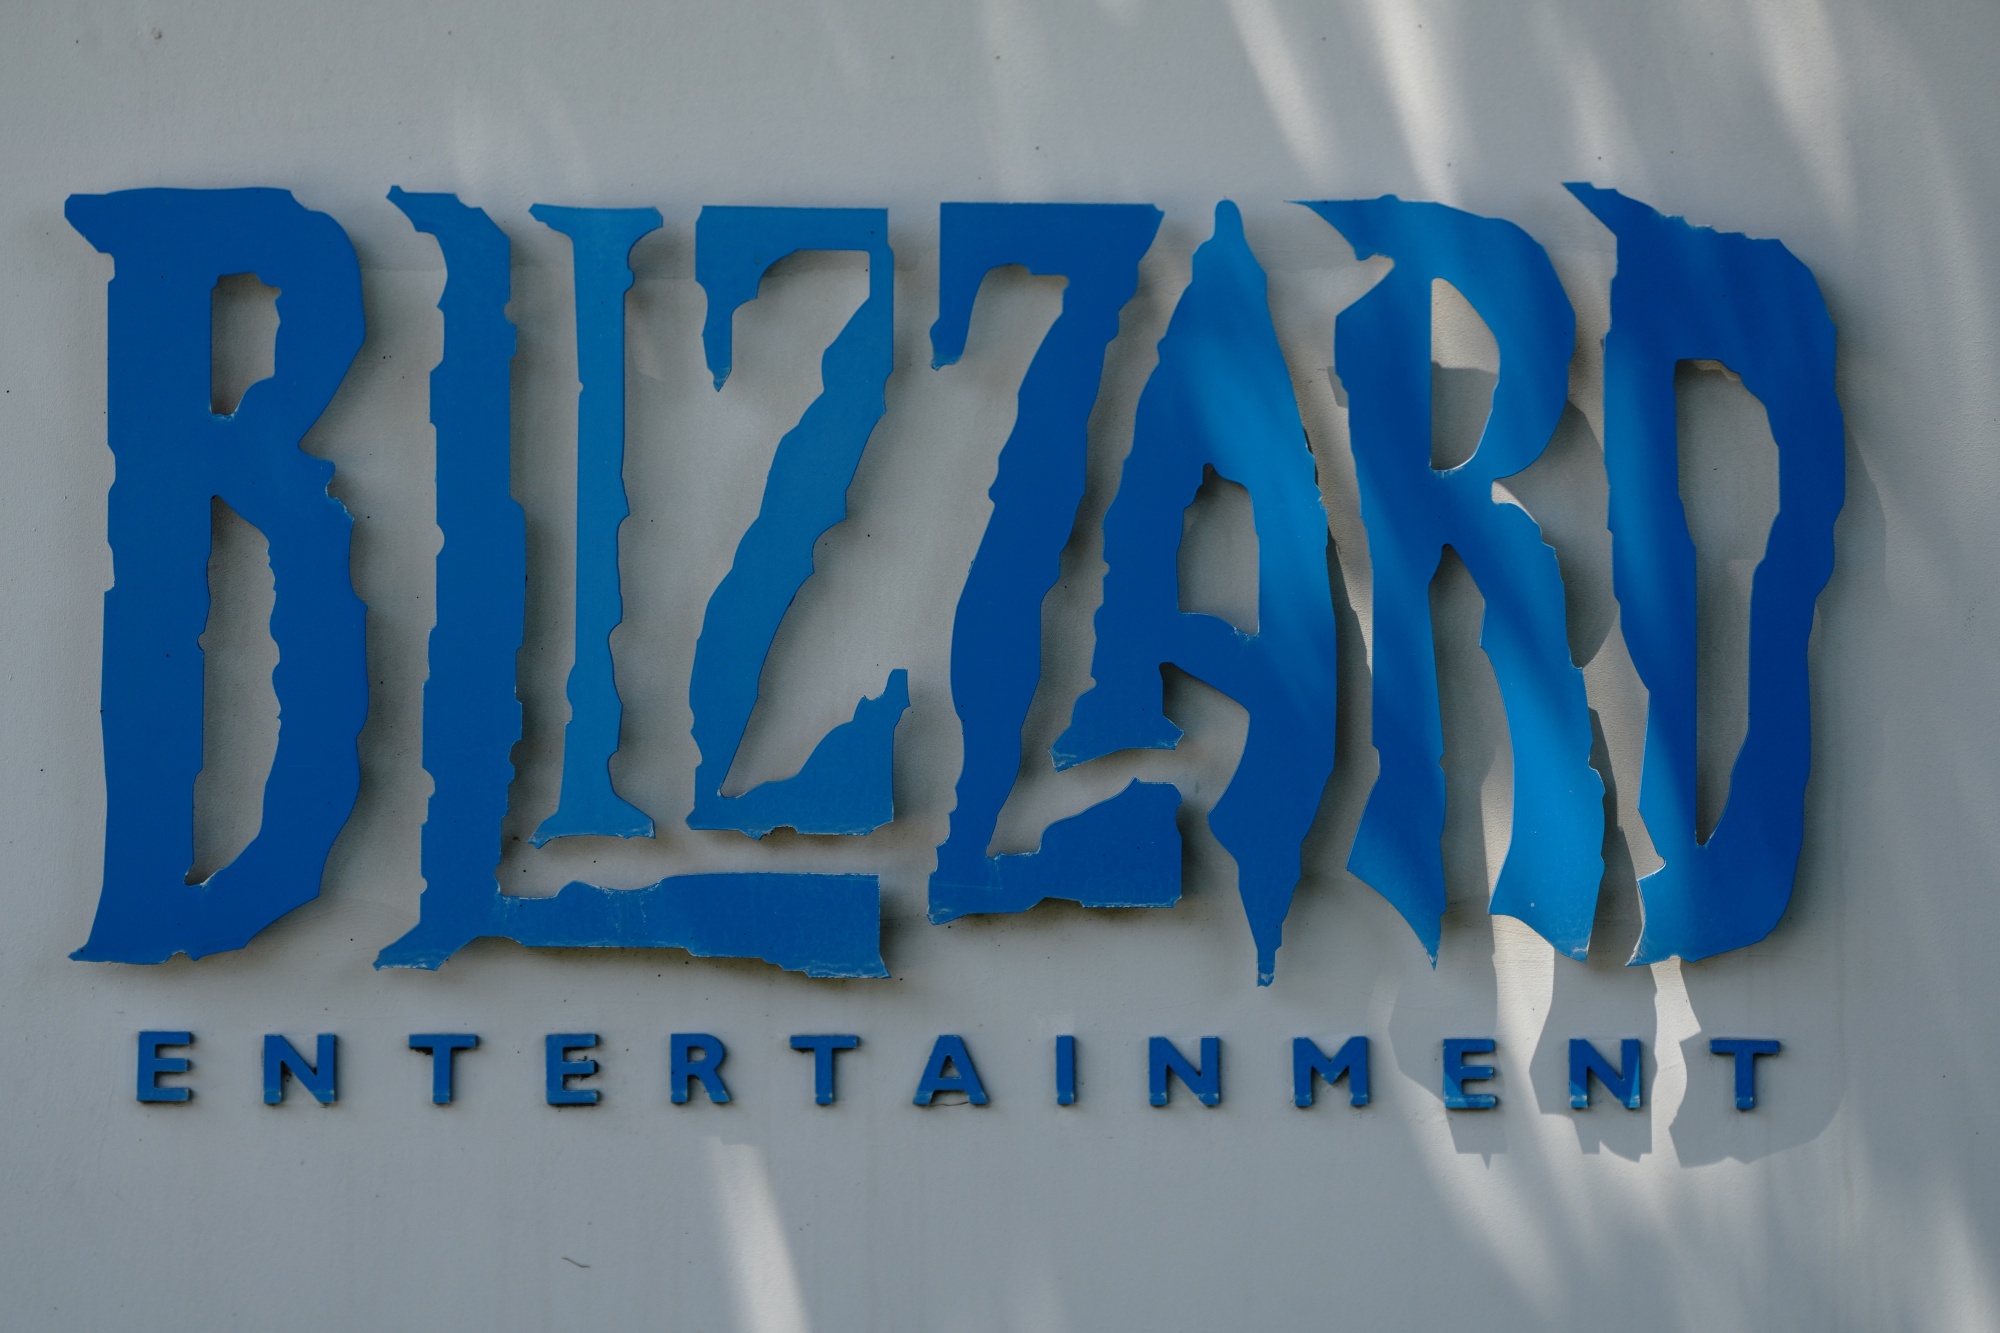 Activision Blizzard Shows Investors the Power of Franchises